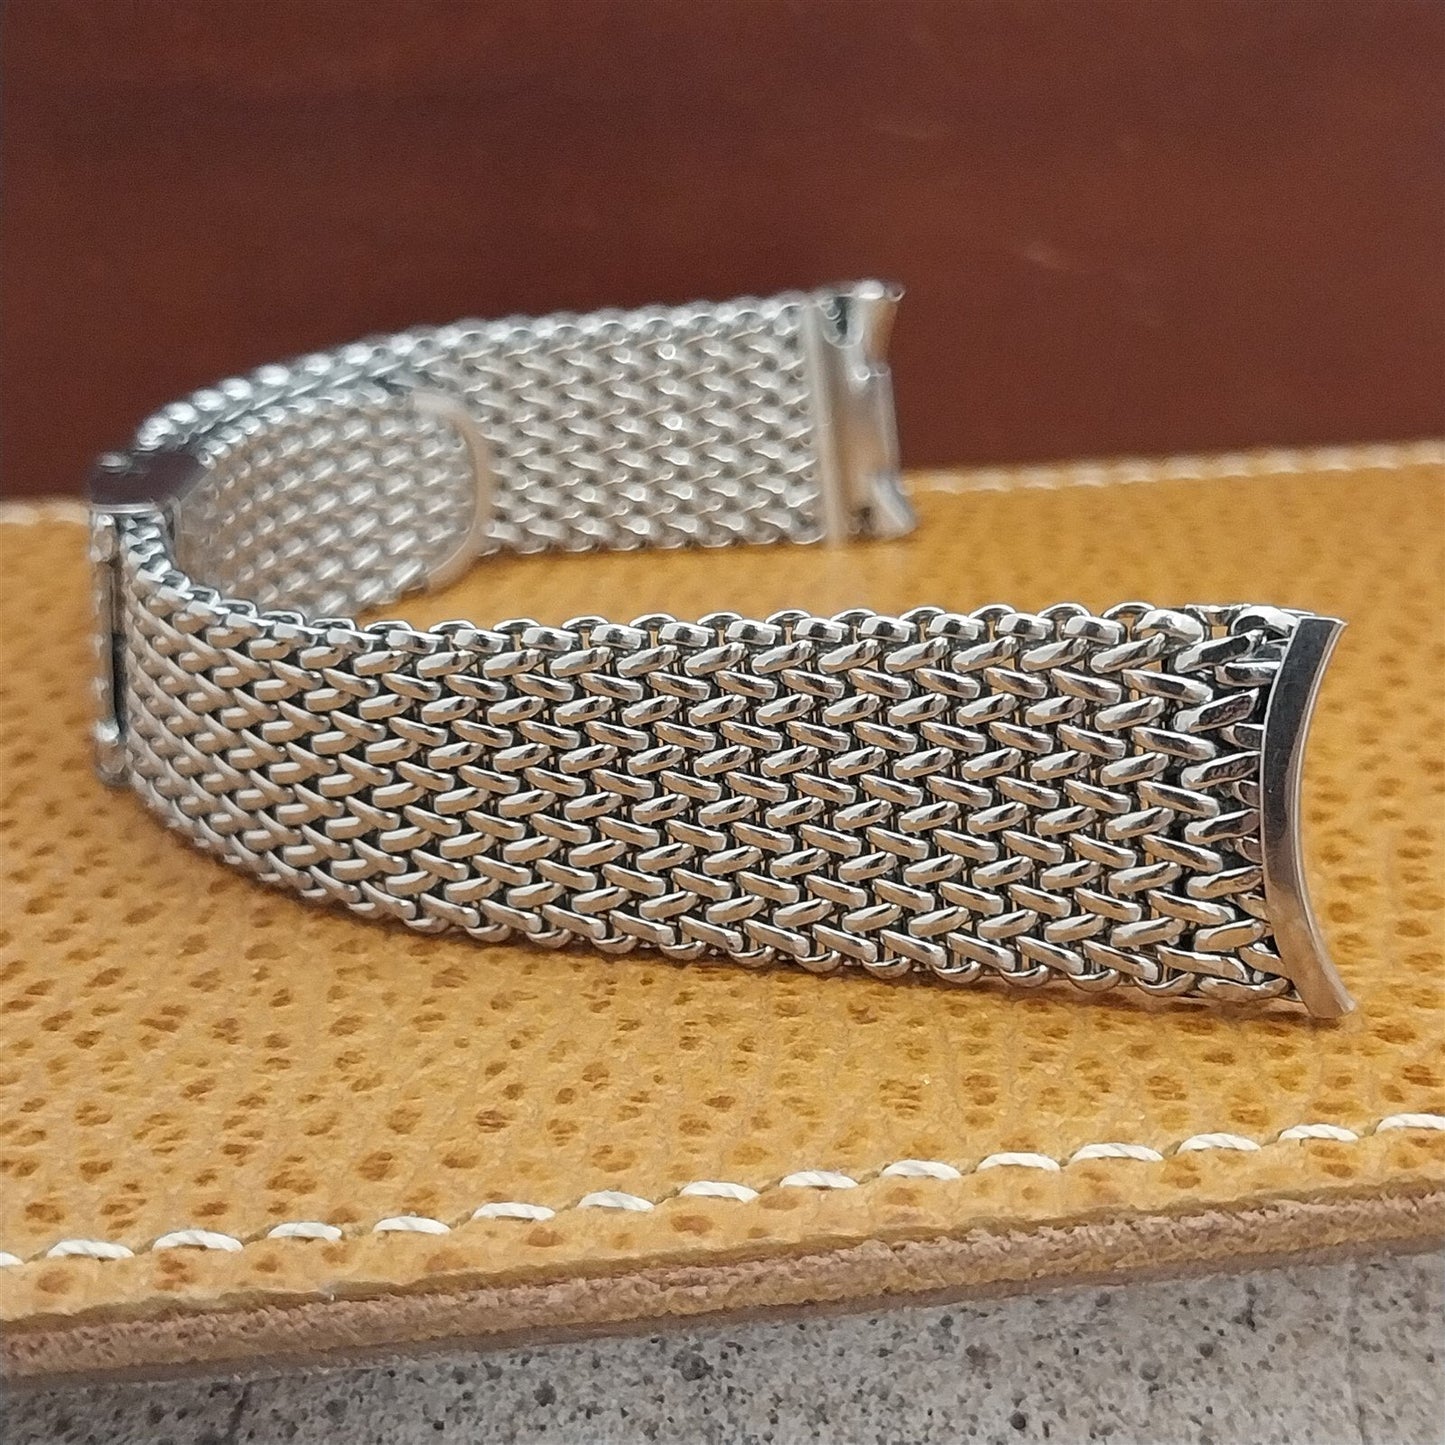 17.2mm Stainless Steel Mesh JB Champion USA nos 1960s Vintage Watch Band